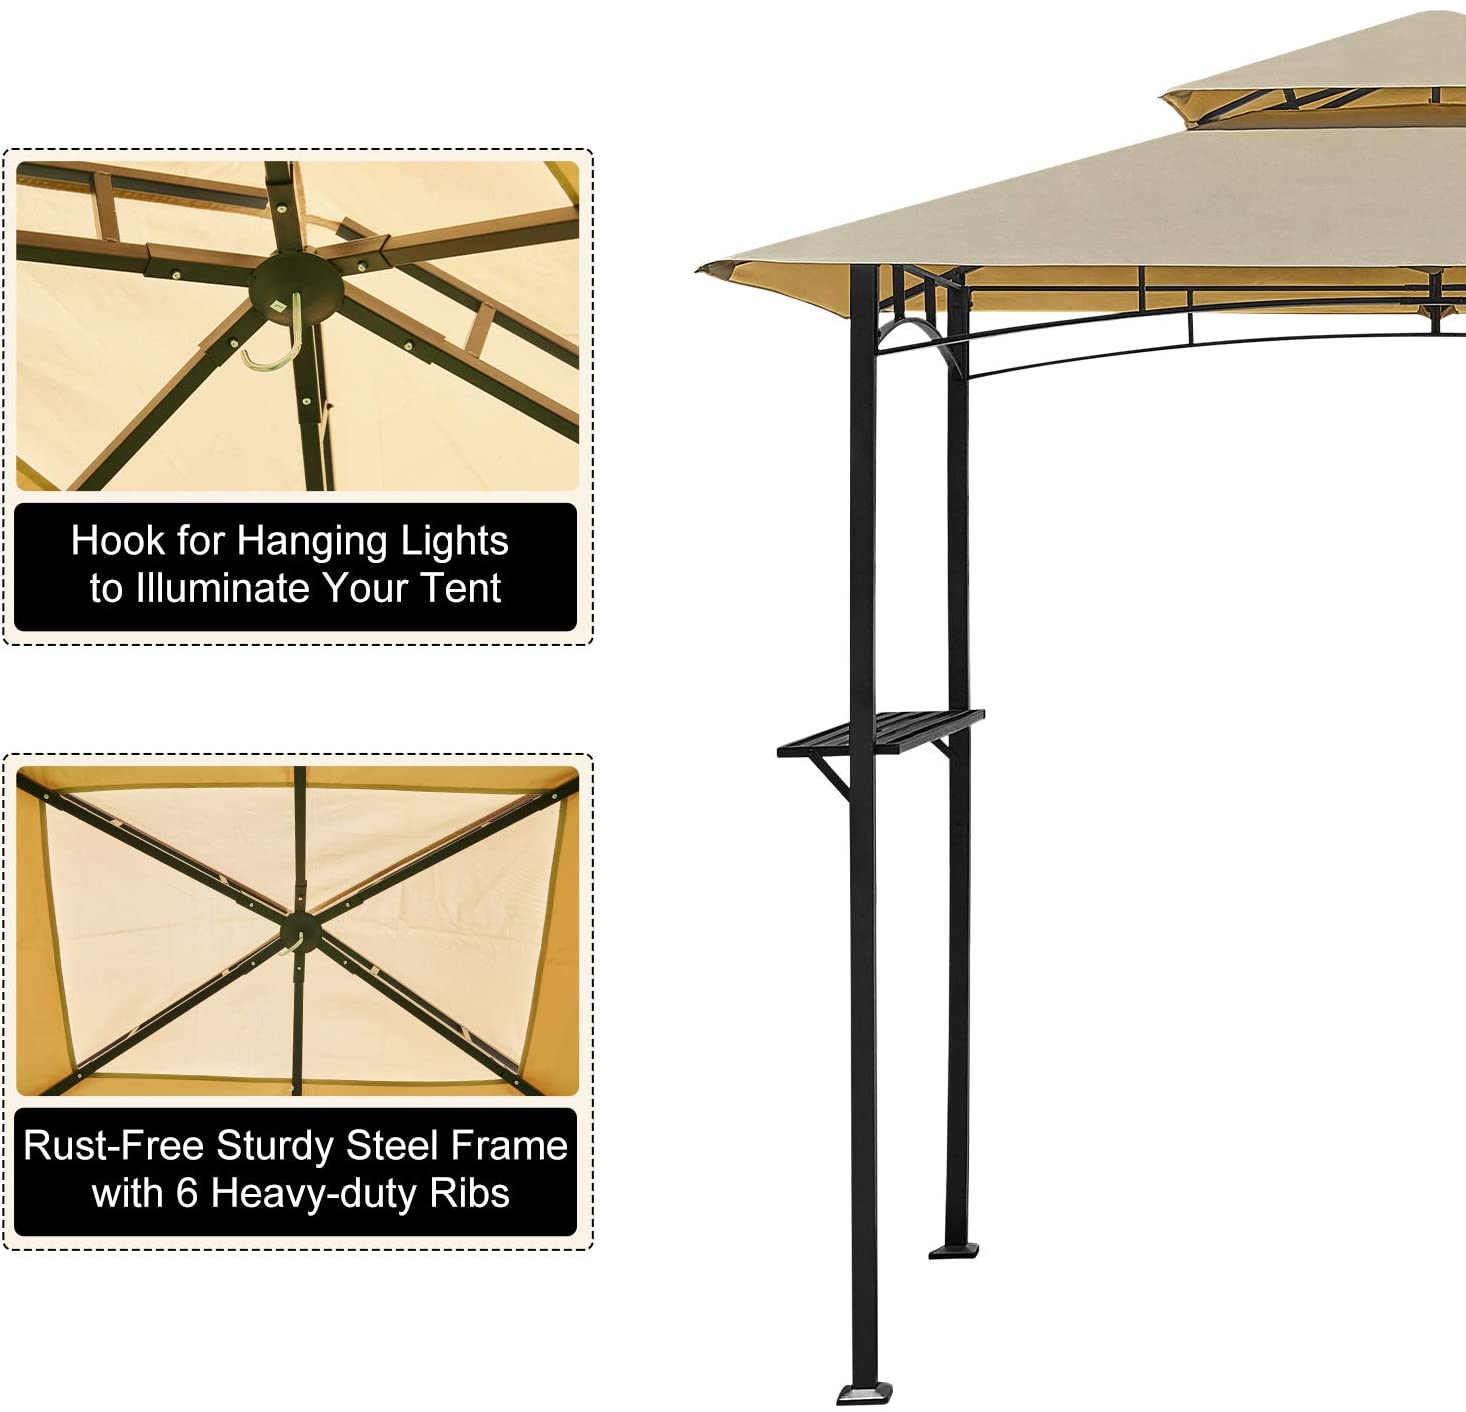 2-Tier Waterproof BBQ Gazebo for Patio and Backyard with Vented Top